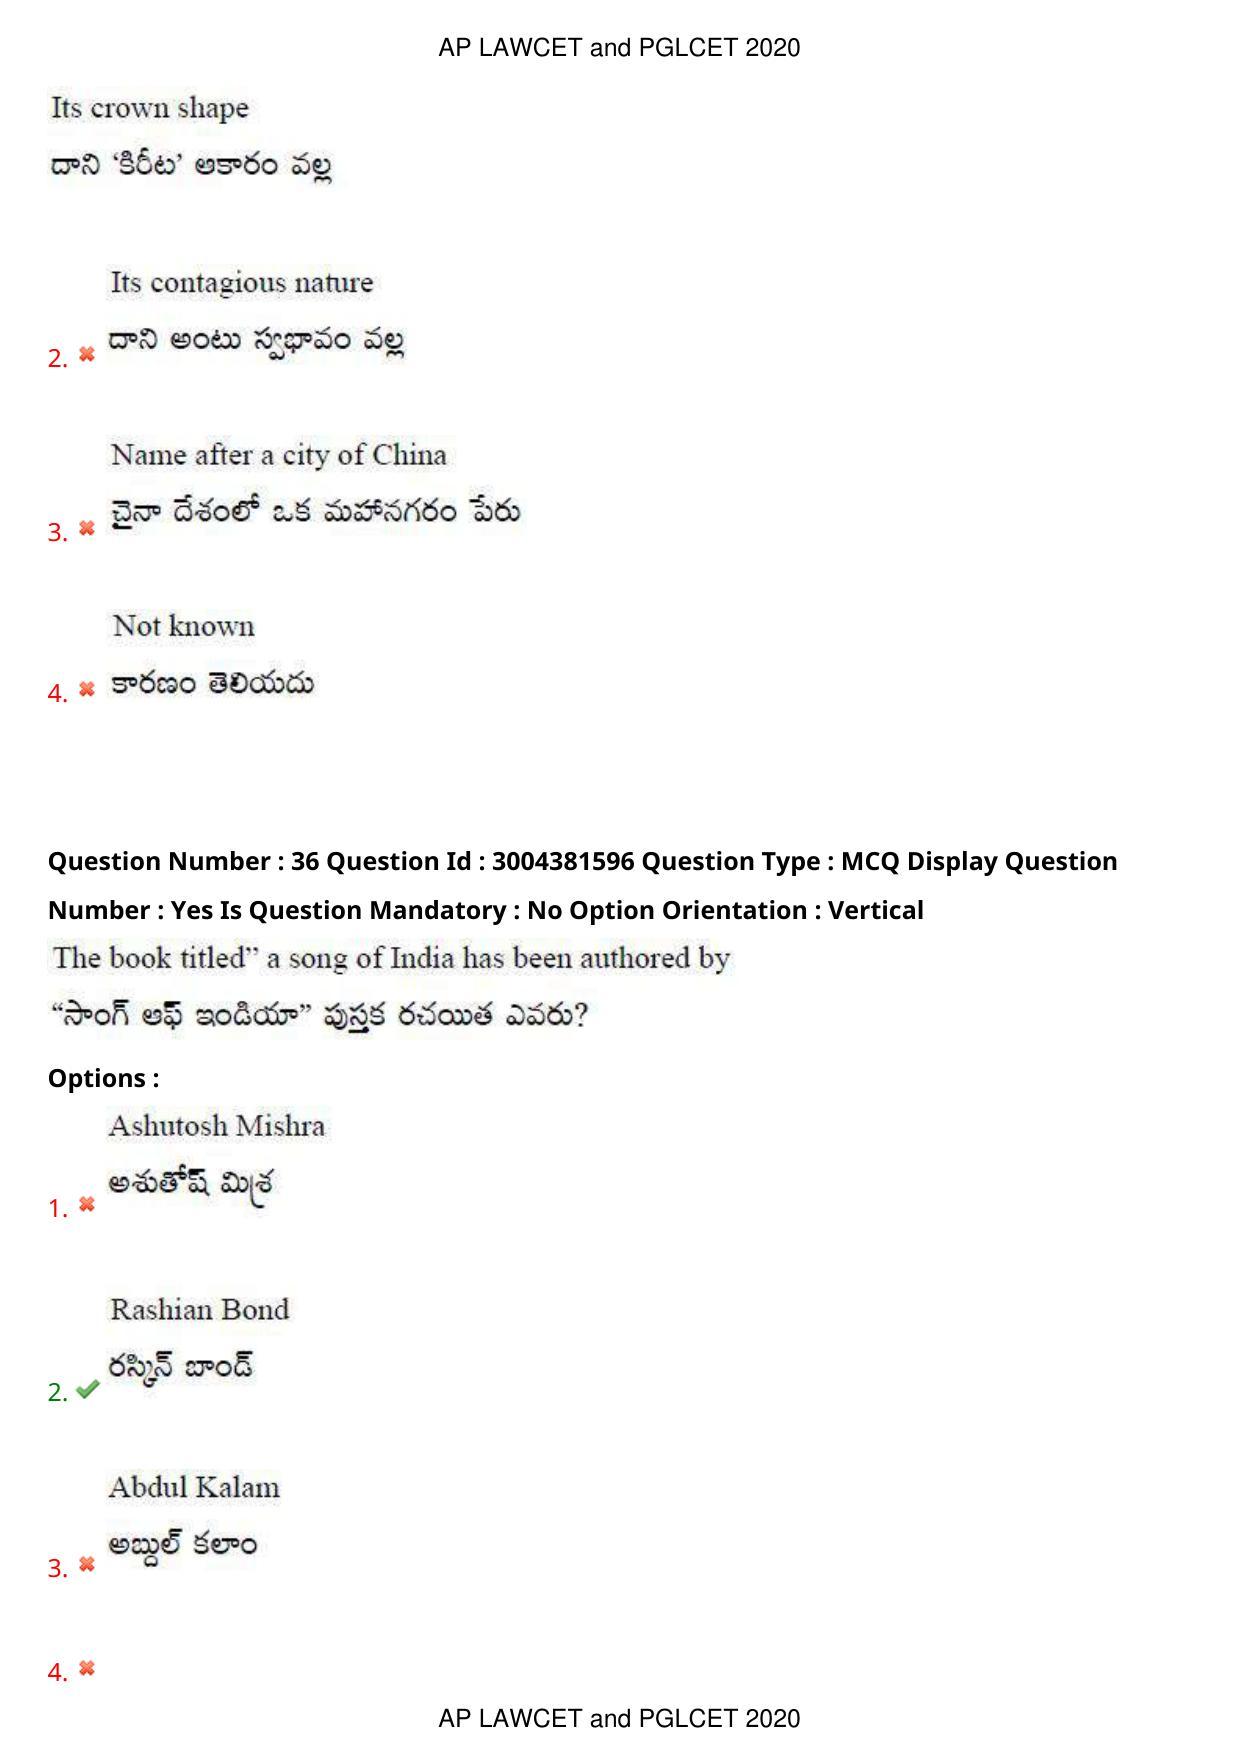 AP LAWCET 2020 - 5 Year LLB Question Paper With Keys - Page 23